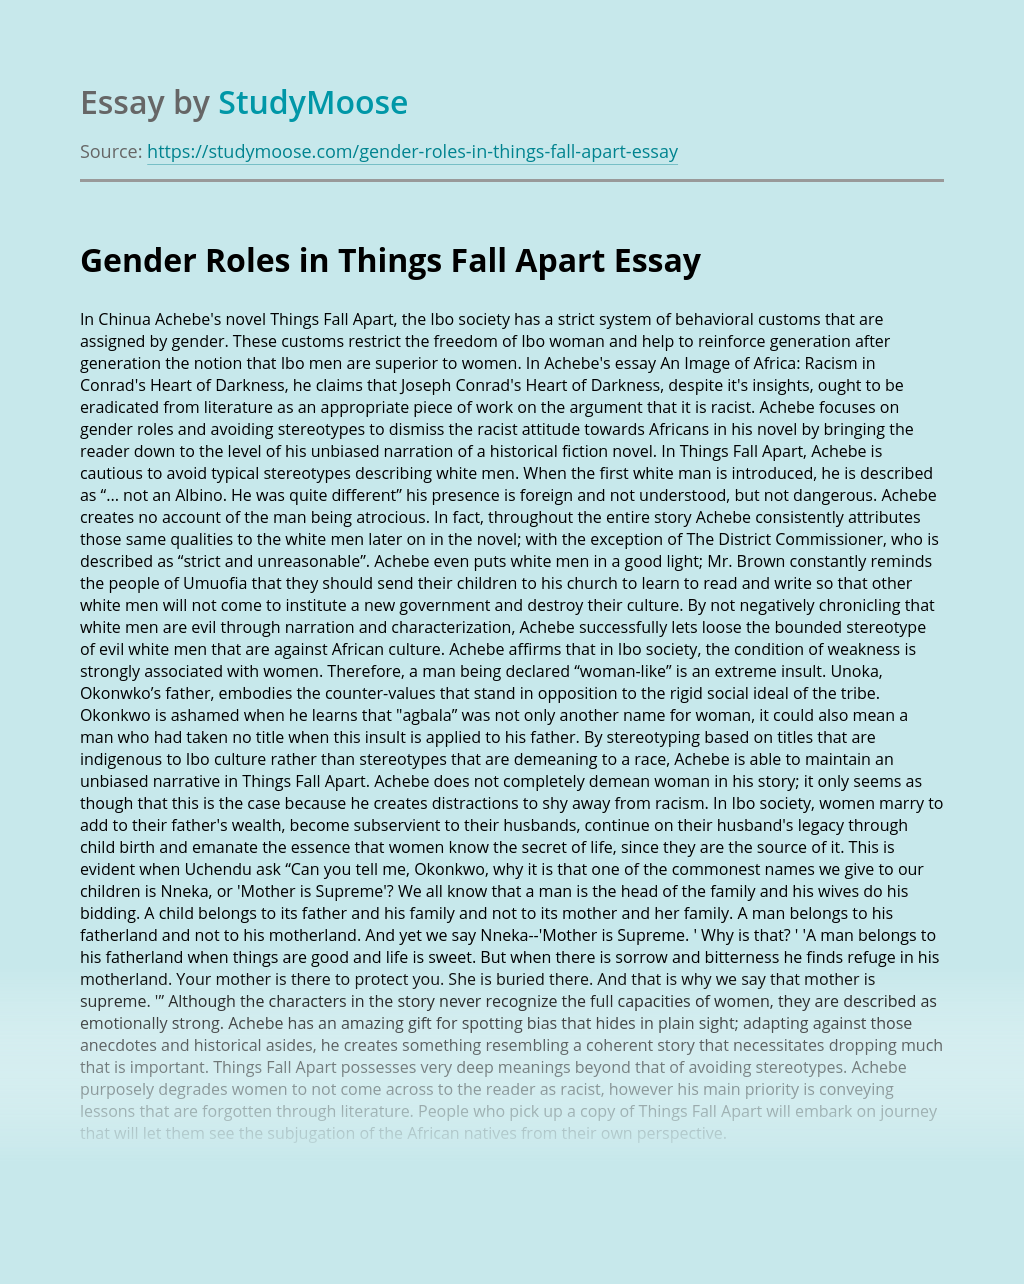 title for an essay about gender roles